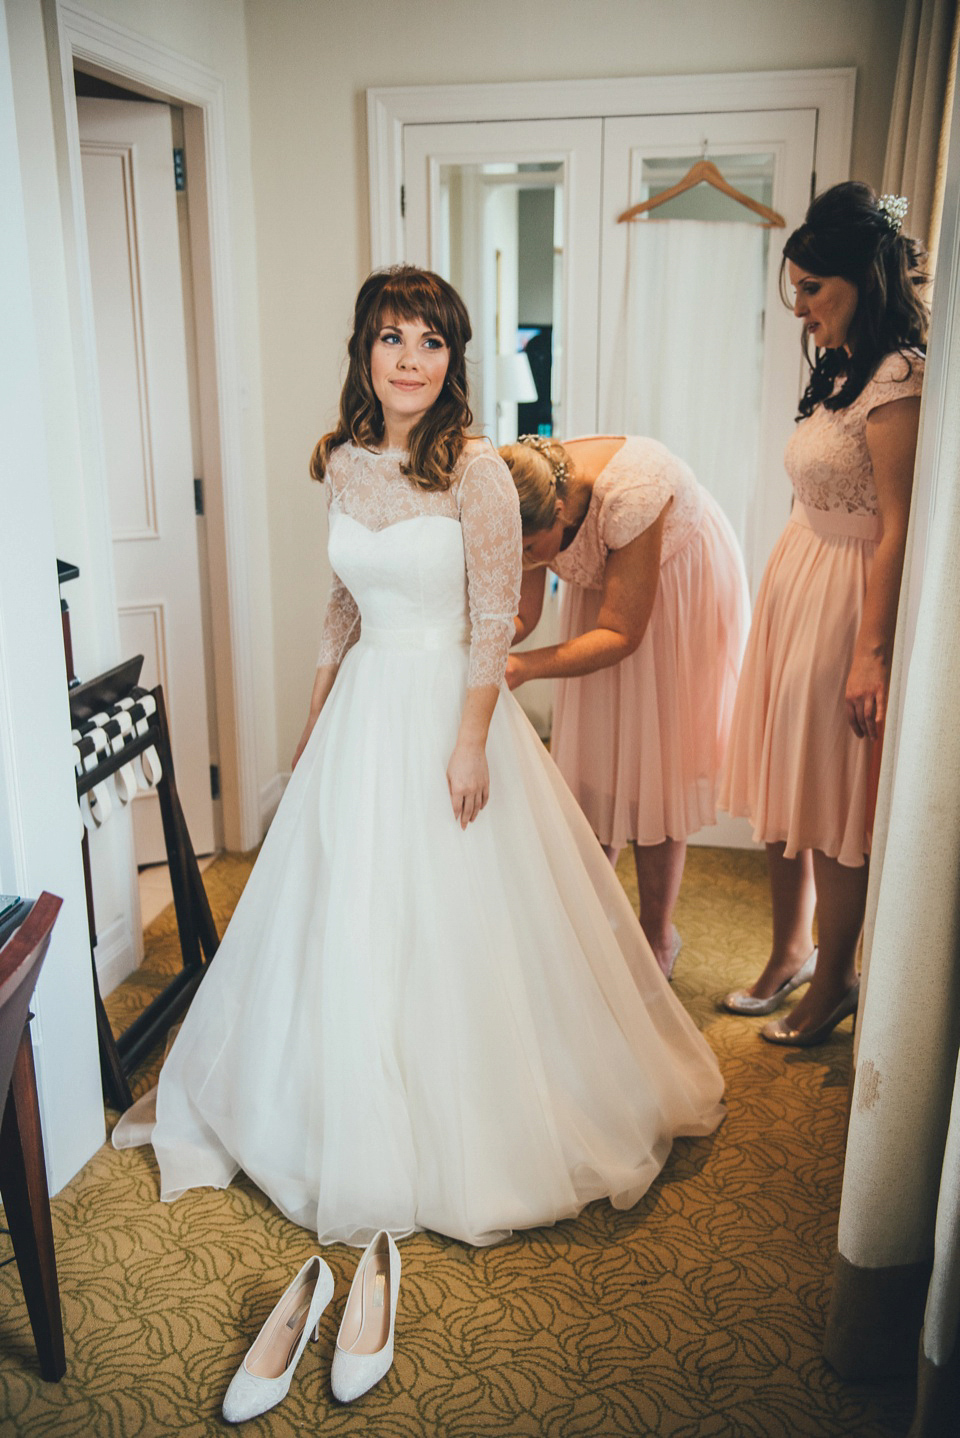 Hannah wore a Caroline Castigliano gown for her wedding to Matt. Photography by Nicola Thompson, film by Magic Hour Films